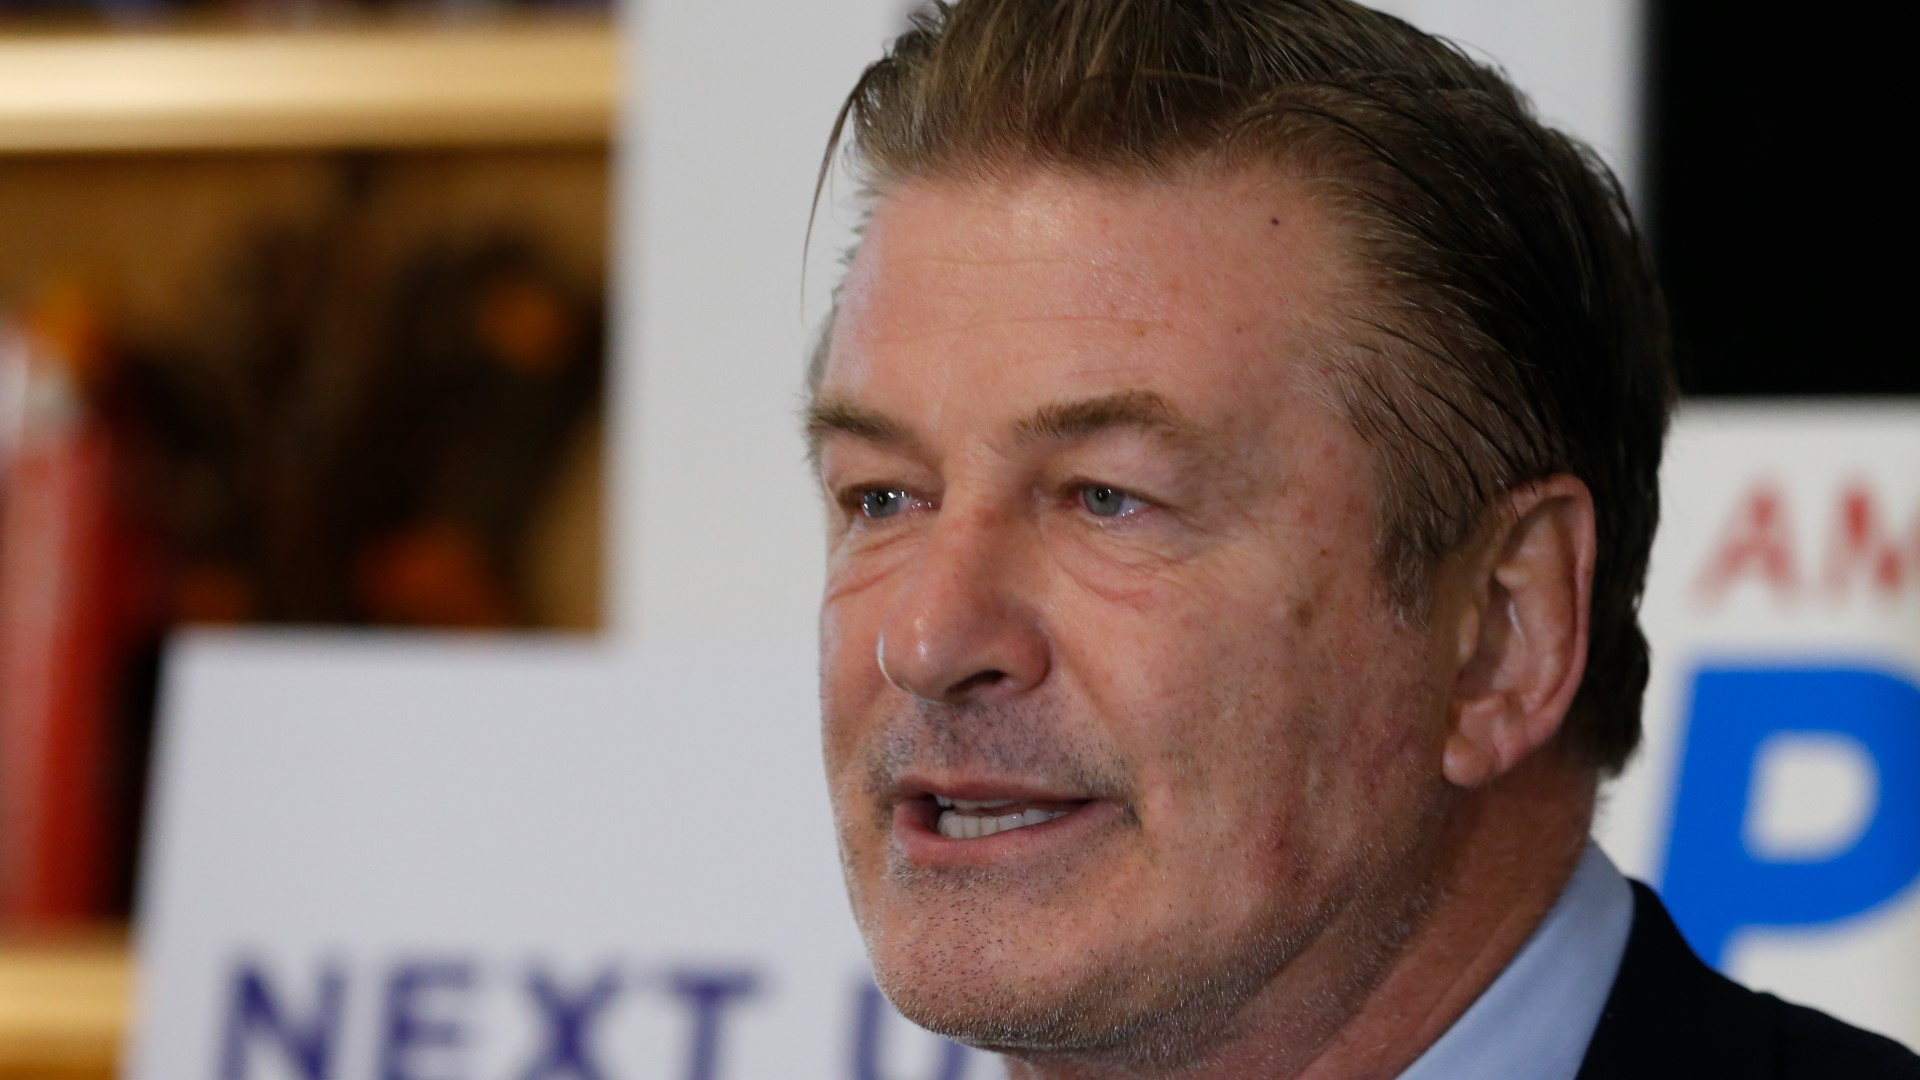 A grand jury indicted Alec Baldwin on Friday on an involuntary manslaughter charge in a 2021 fatal shooting during a rehearsal on a movie set in New Mexico.